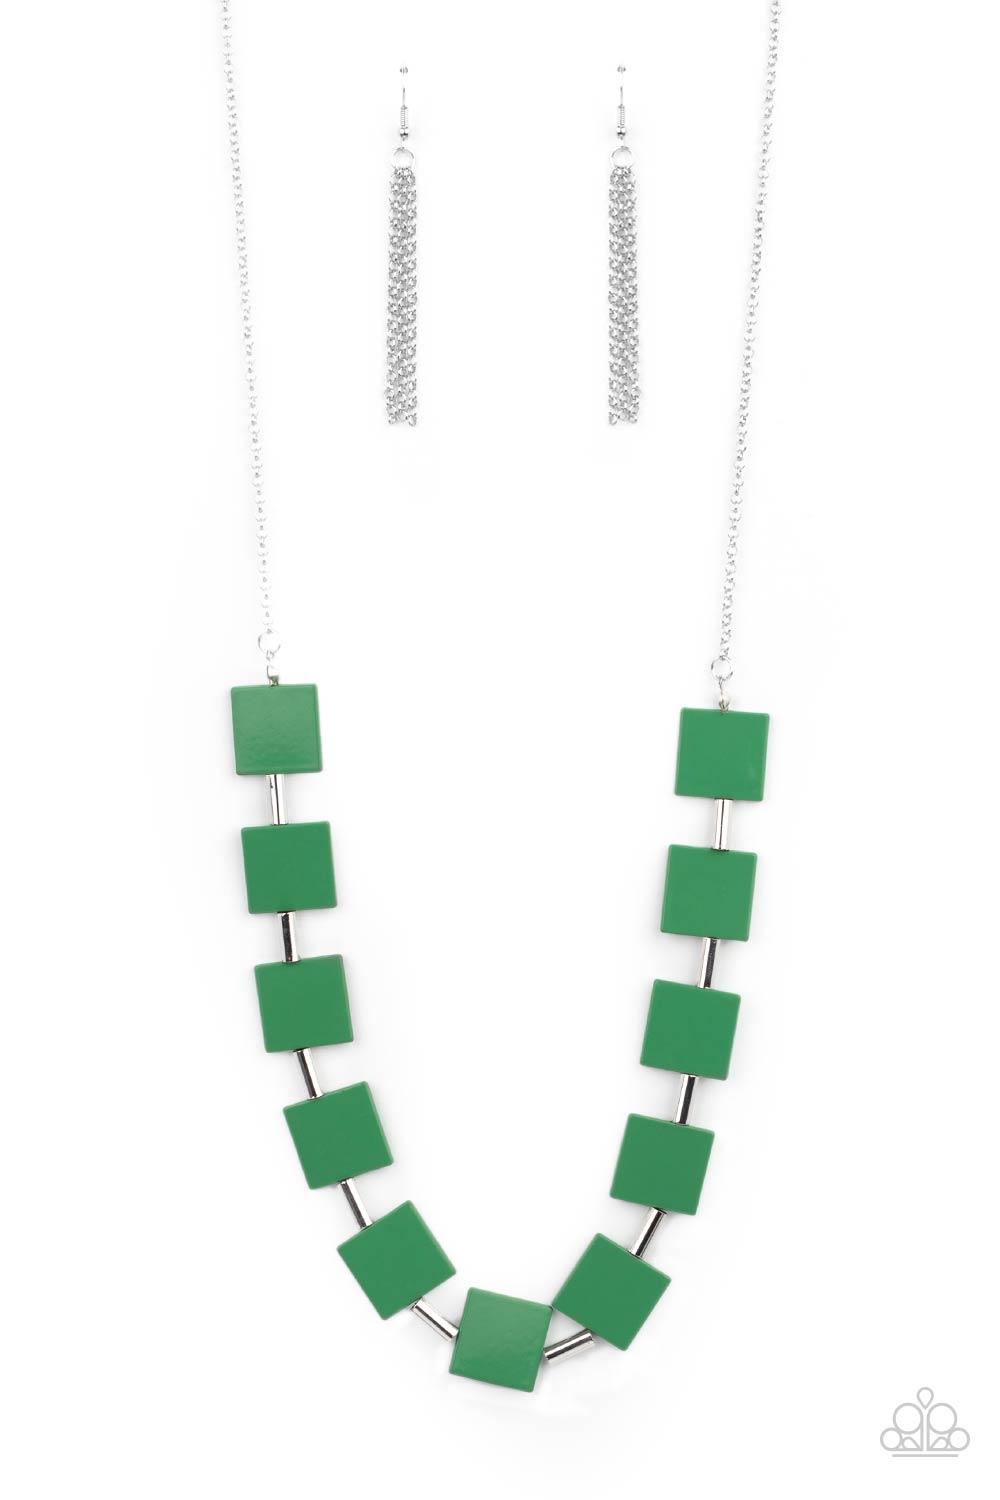 Paparazzi Accessories Hello, Material Girl - Green Vibrant geometric squares painted in the spring Pantone® of Mint flare out along a long silver chain as it drapes along the chest. Sleek silver cylinders separate the square plates, adding cool metallic a